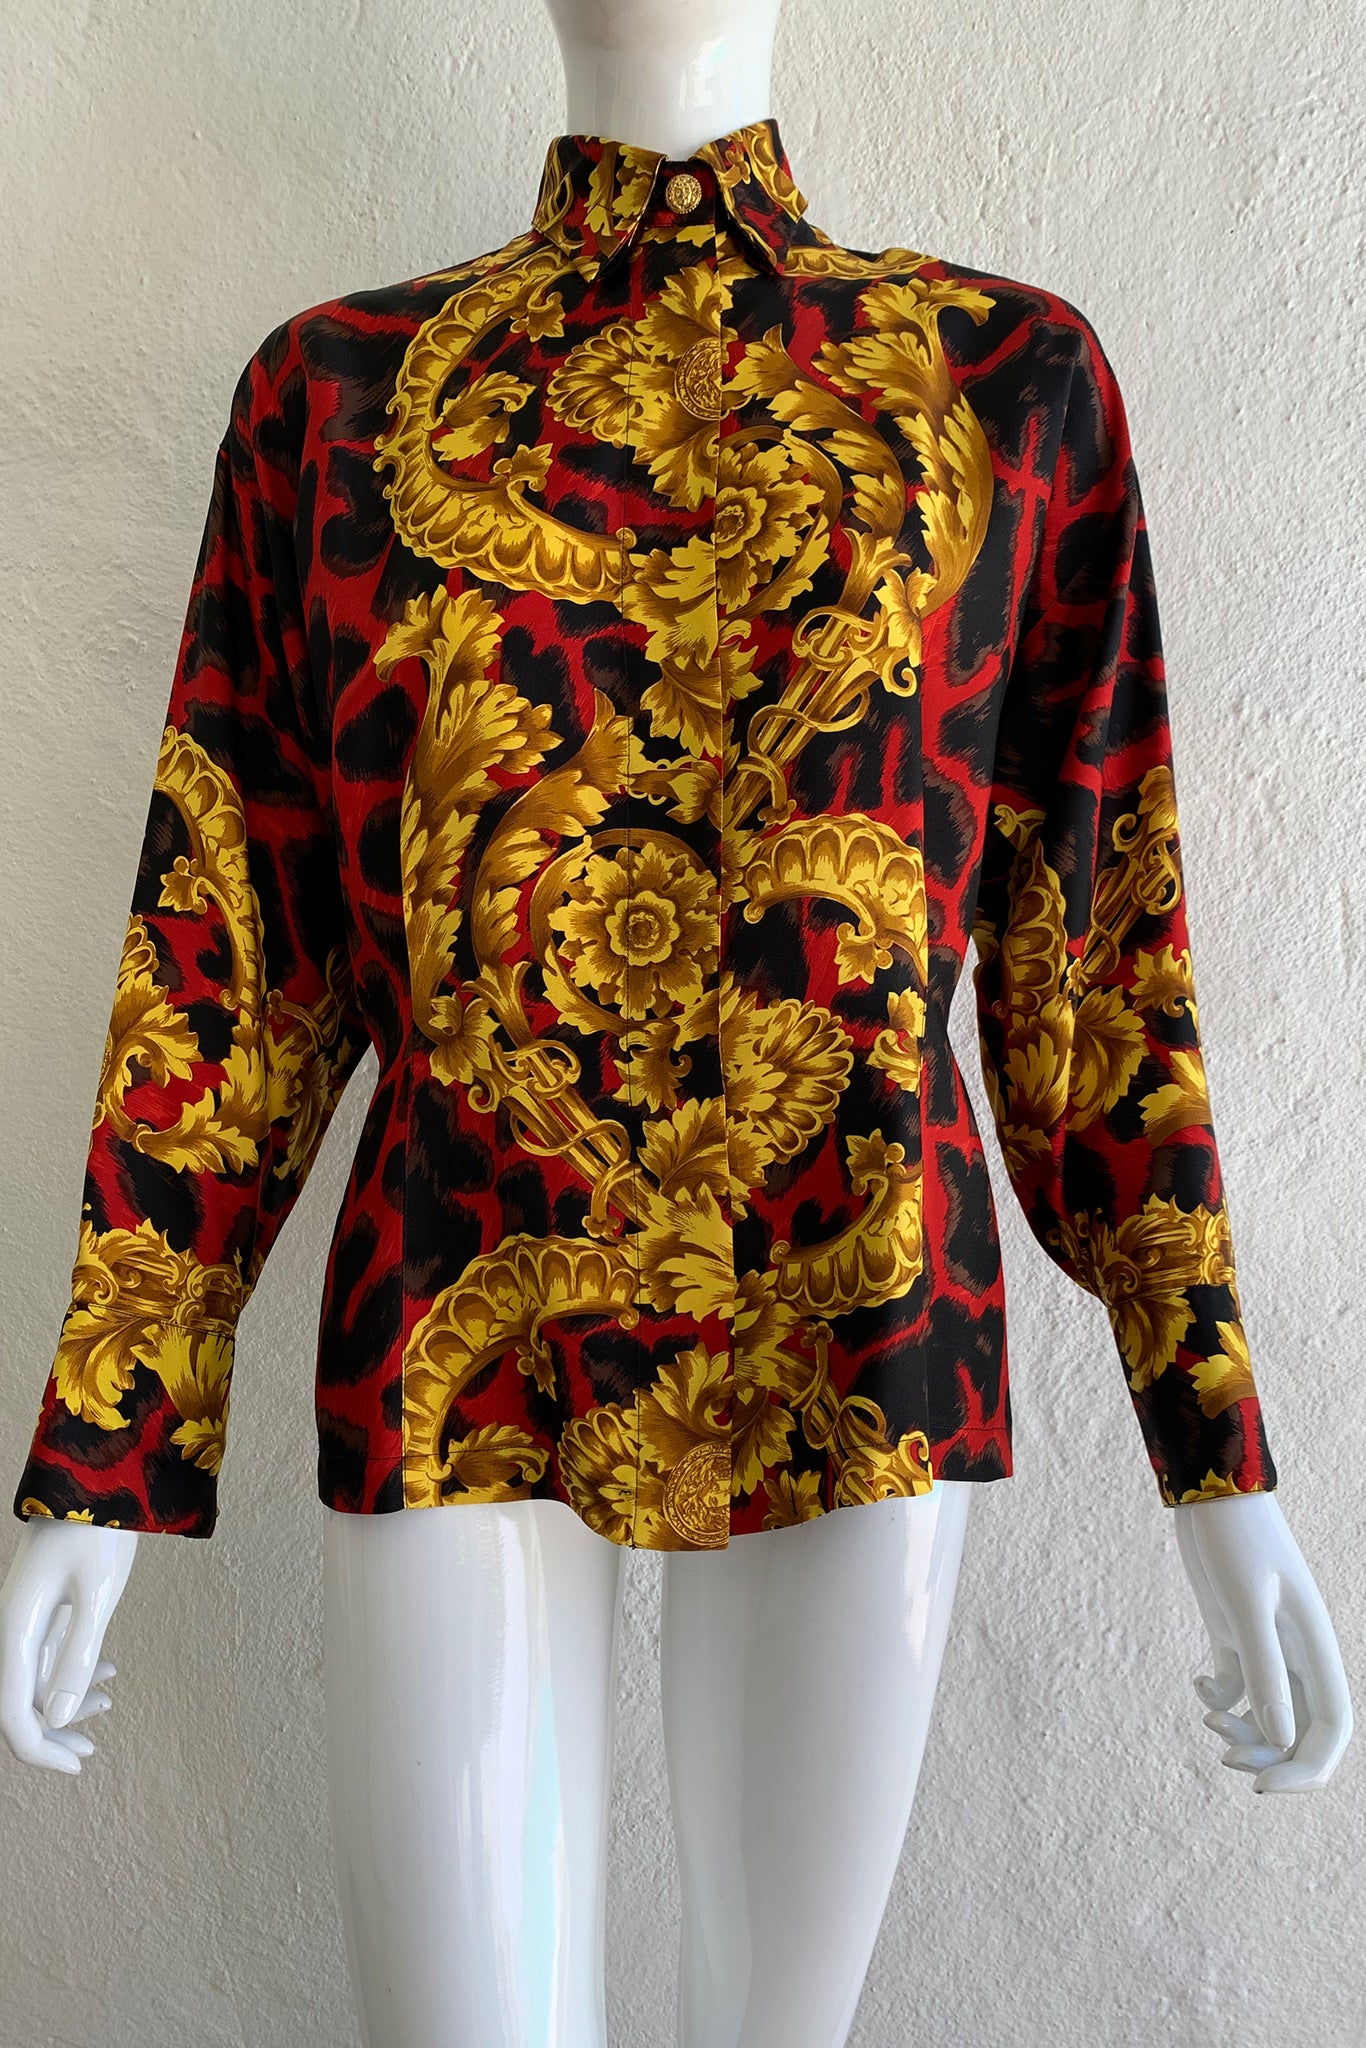 Vintage Gianni Versace Baroque Animal Print Silk Shirt on Mannequin front at Recess